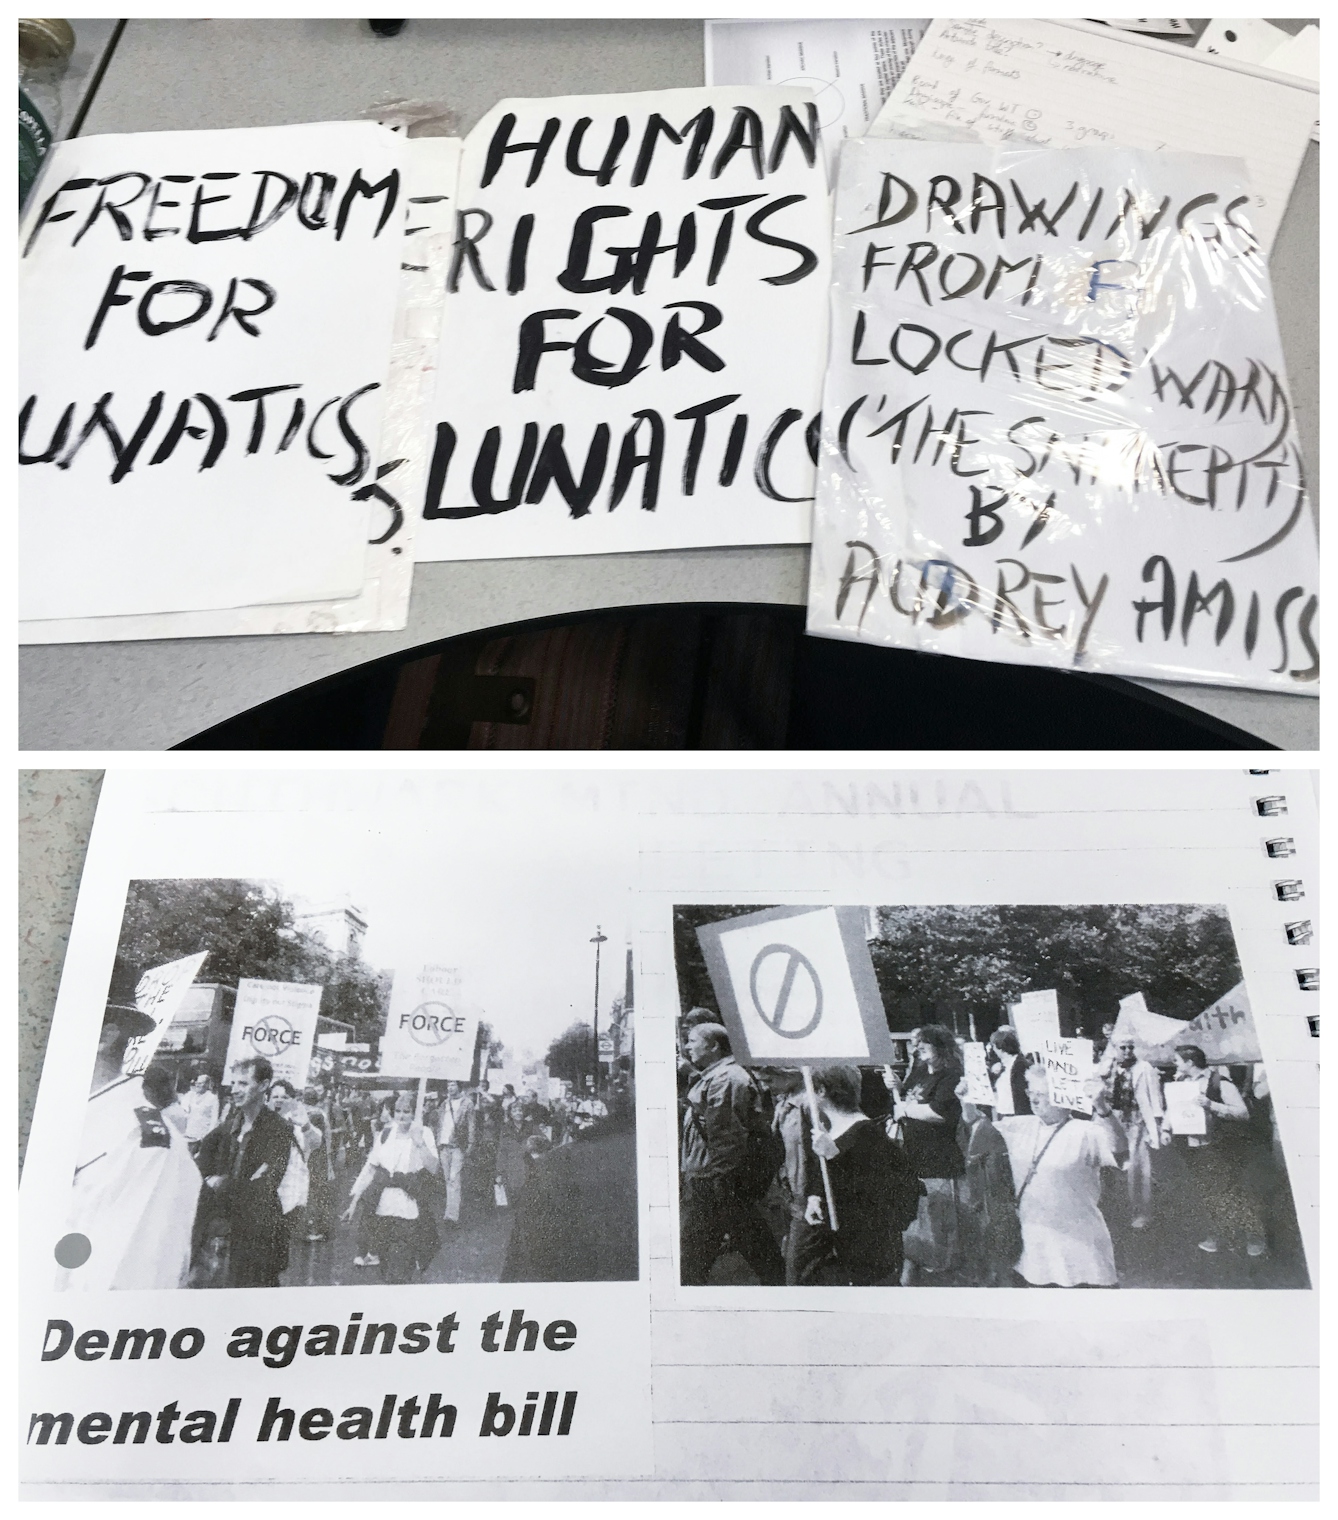 Photographic diptych. The image on the top shows 3 handmade protest banners laid out on an office desk. One reads, 'freedom for lunatics' another, 'human rights for lunatics' and the 3rd, 'Drawing from locked ward ('the snakepit') by Audrey Amis. The image on the bottom shows a scrapbook page with newspaper clippings. in the of the reports photos a woman in a white t-shirt can be seen holding two of the banners.